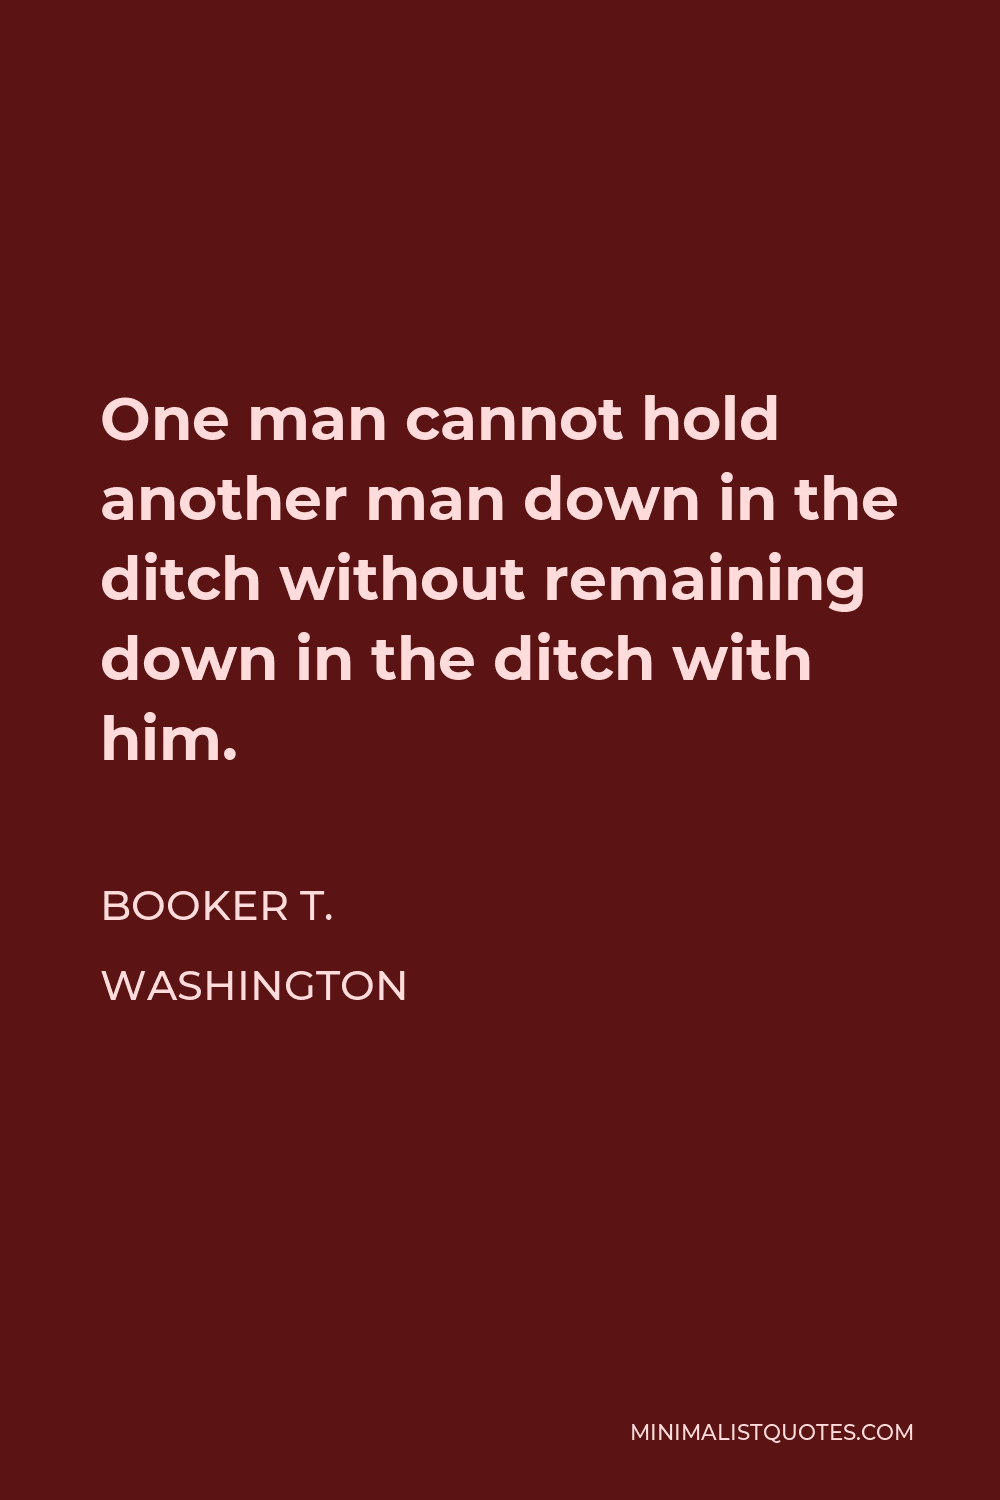 Booker T. Washington Quote - One man cannot hold another man down in the ditch without remaining down in the ditch with him.